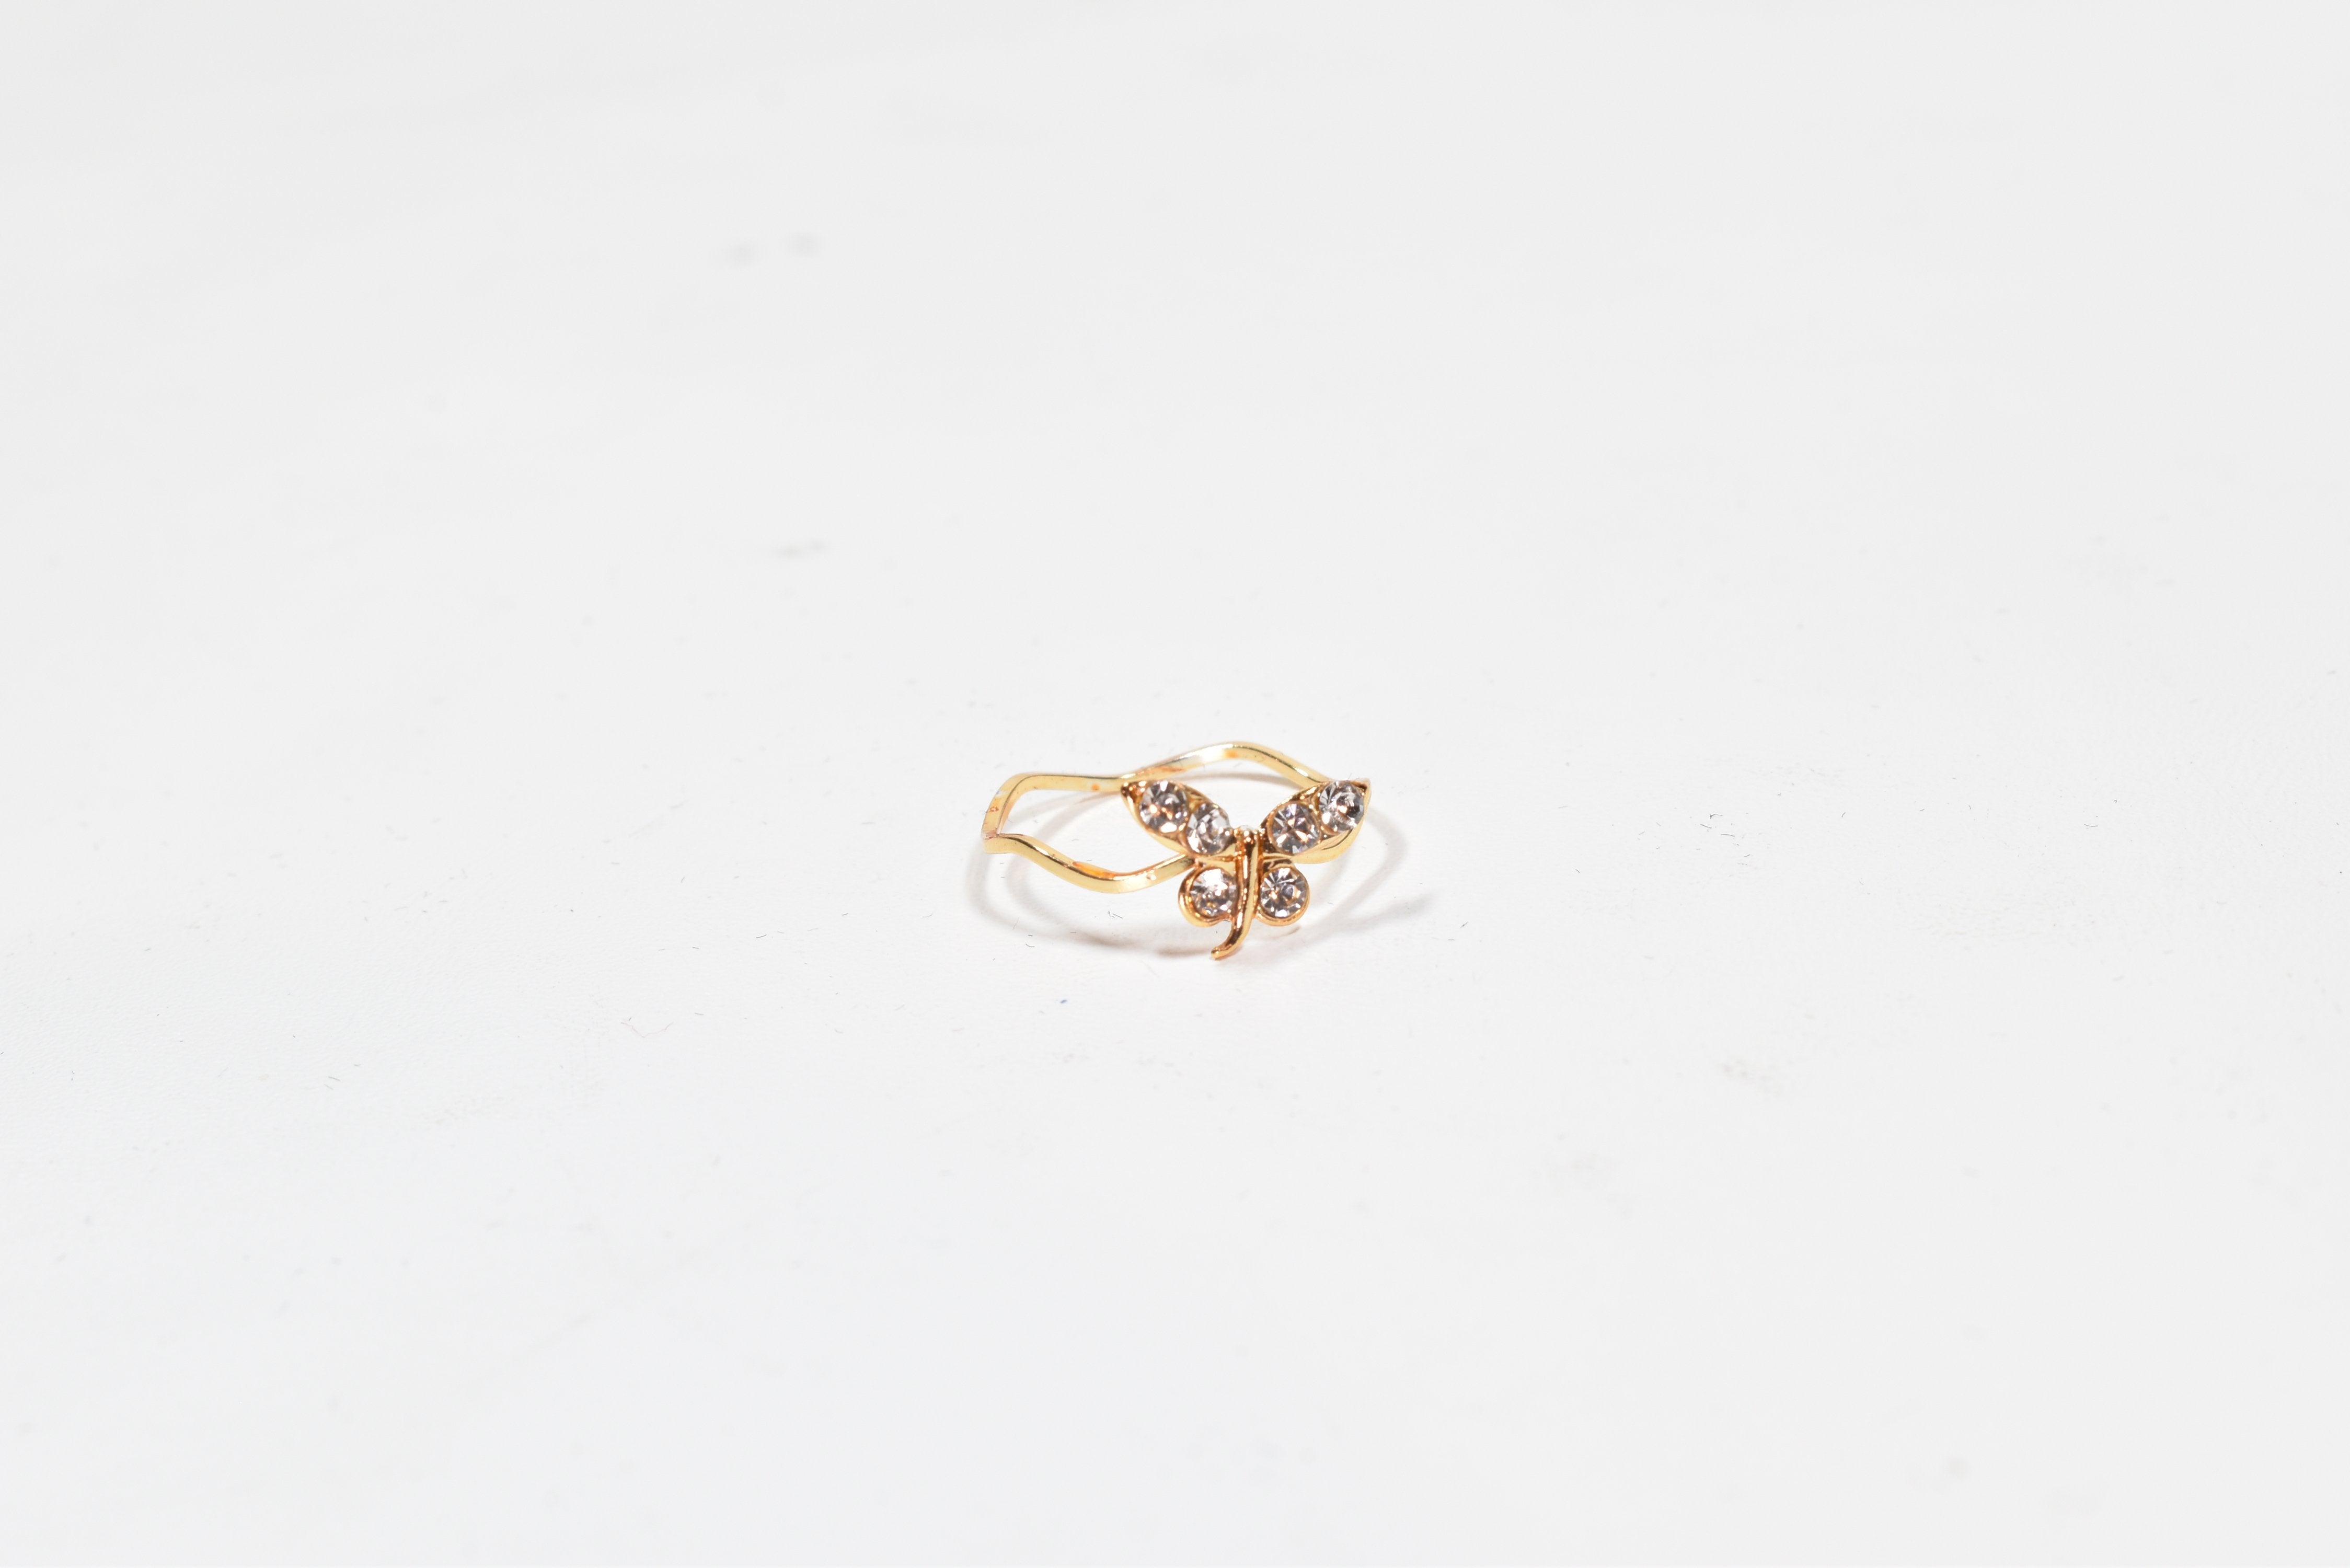 Crystal Butter fly gold band April ring US. Size 7 1/2 Used -00028